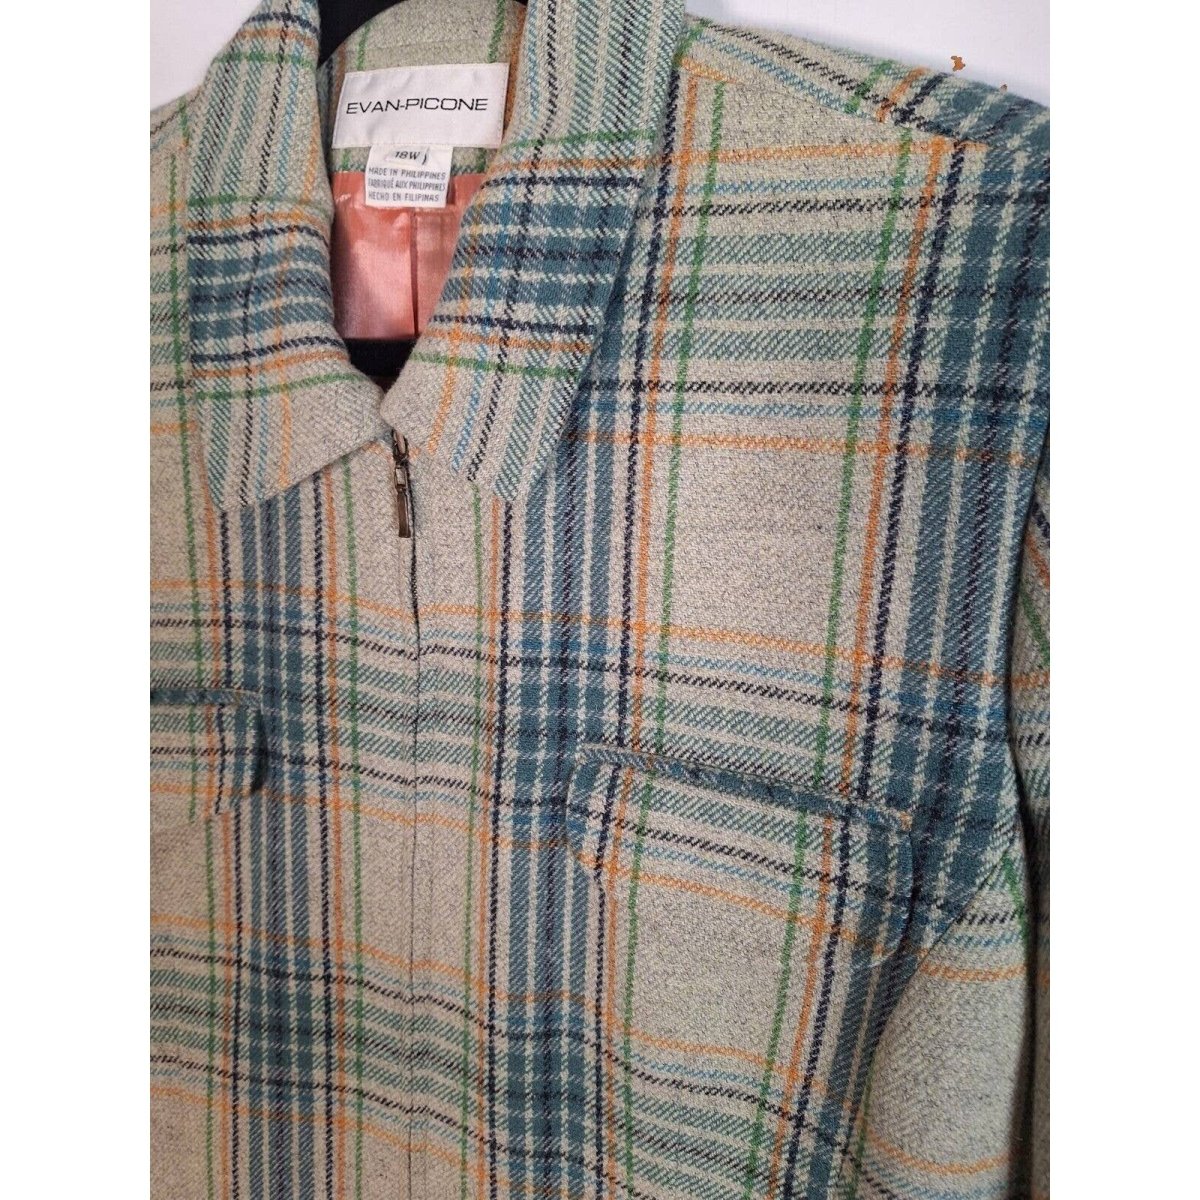 Vintage 90s does 60s Plaid Wool Blend Zip Up Chore Jacket Women's Size 18W - themallvintage The Mall Vintage